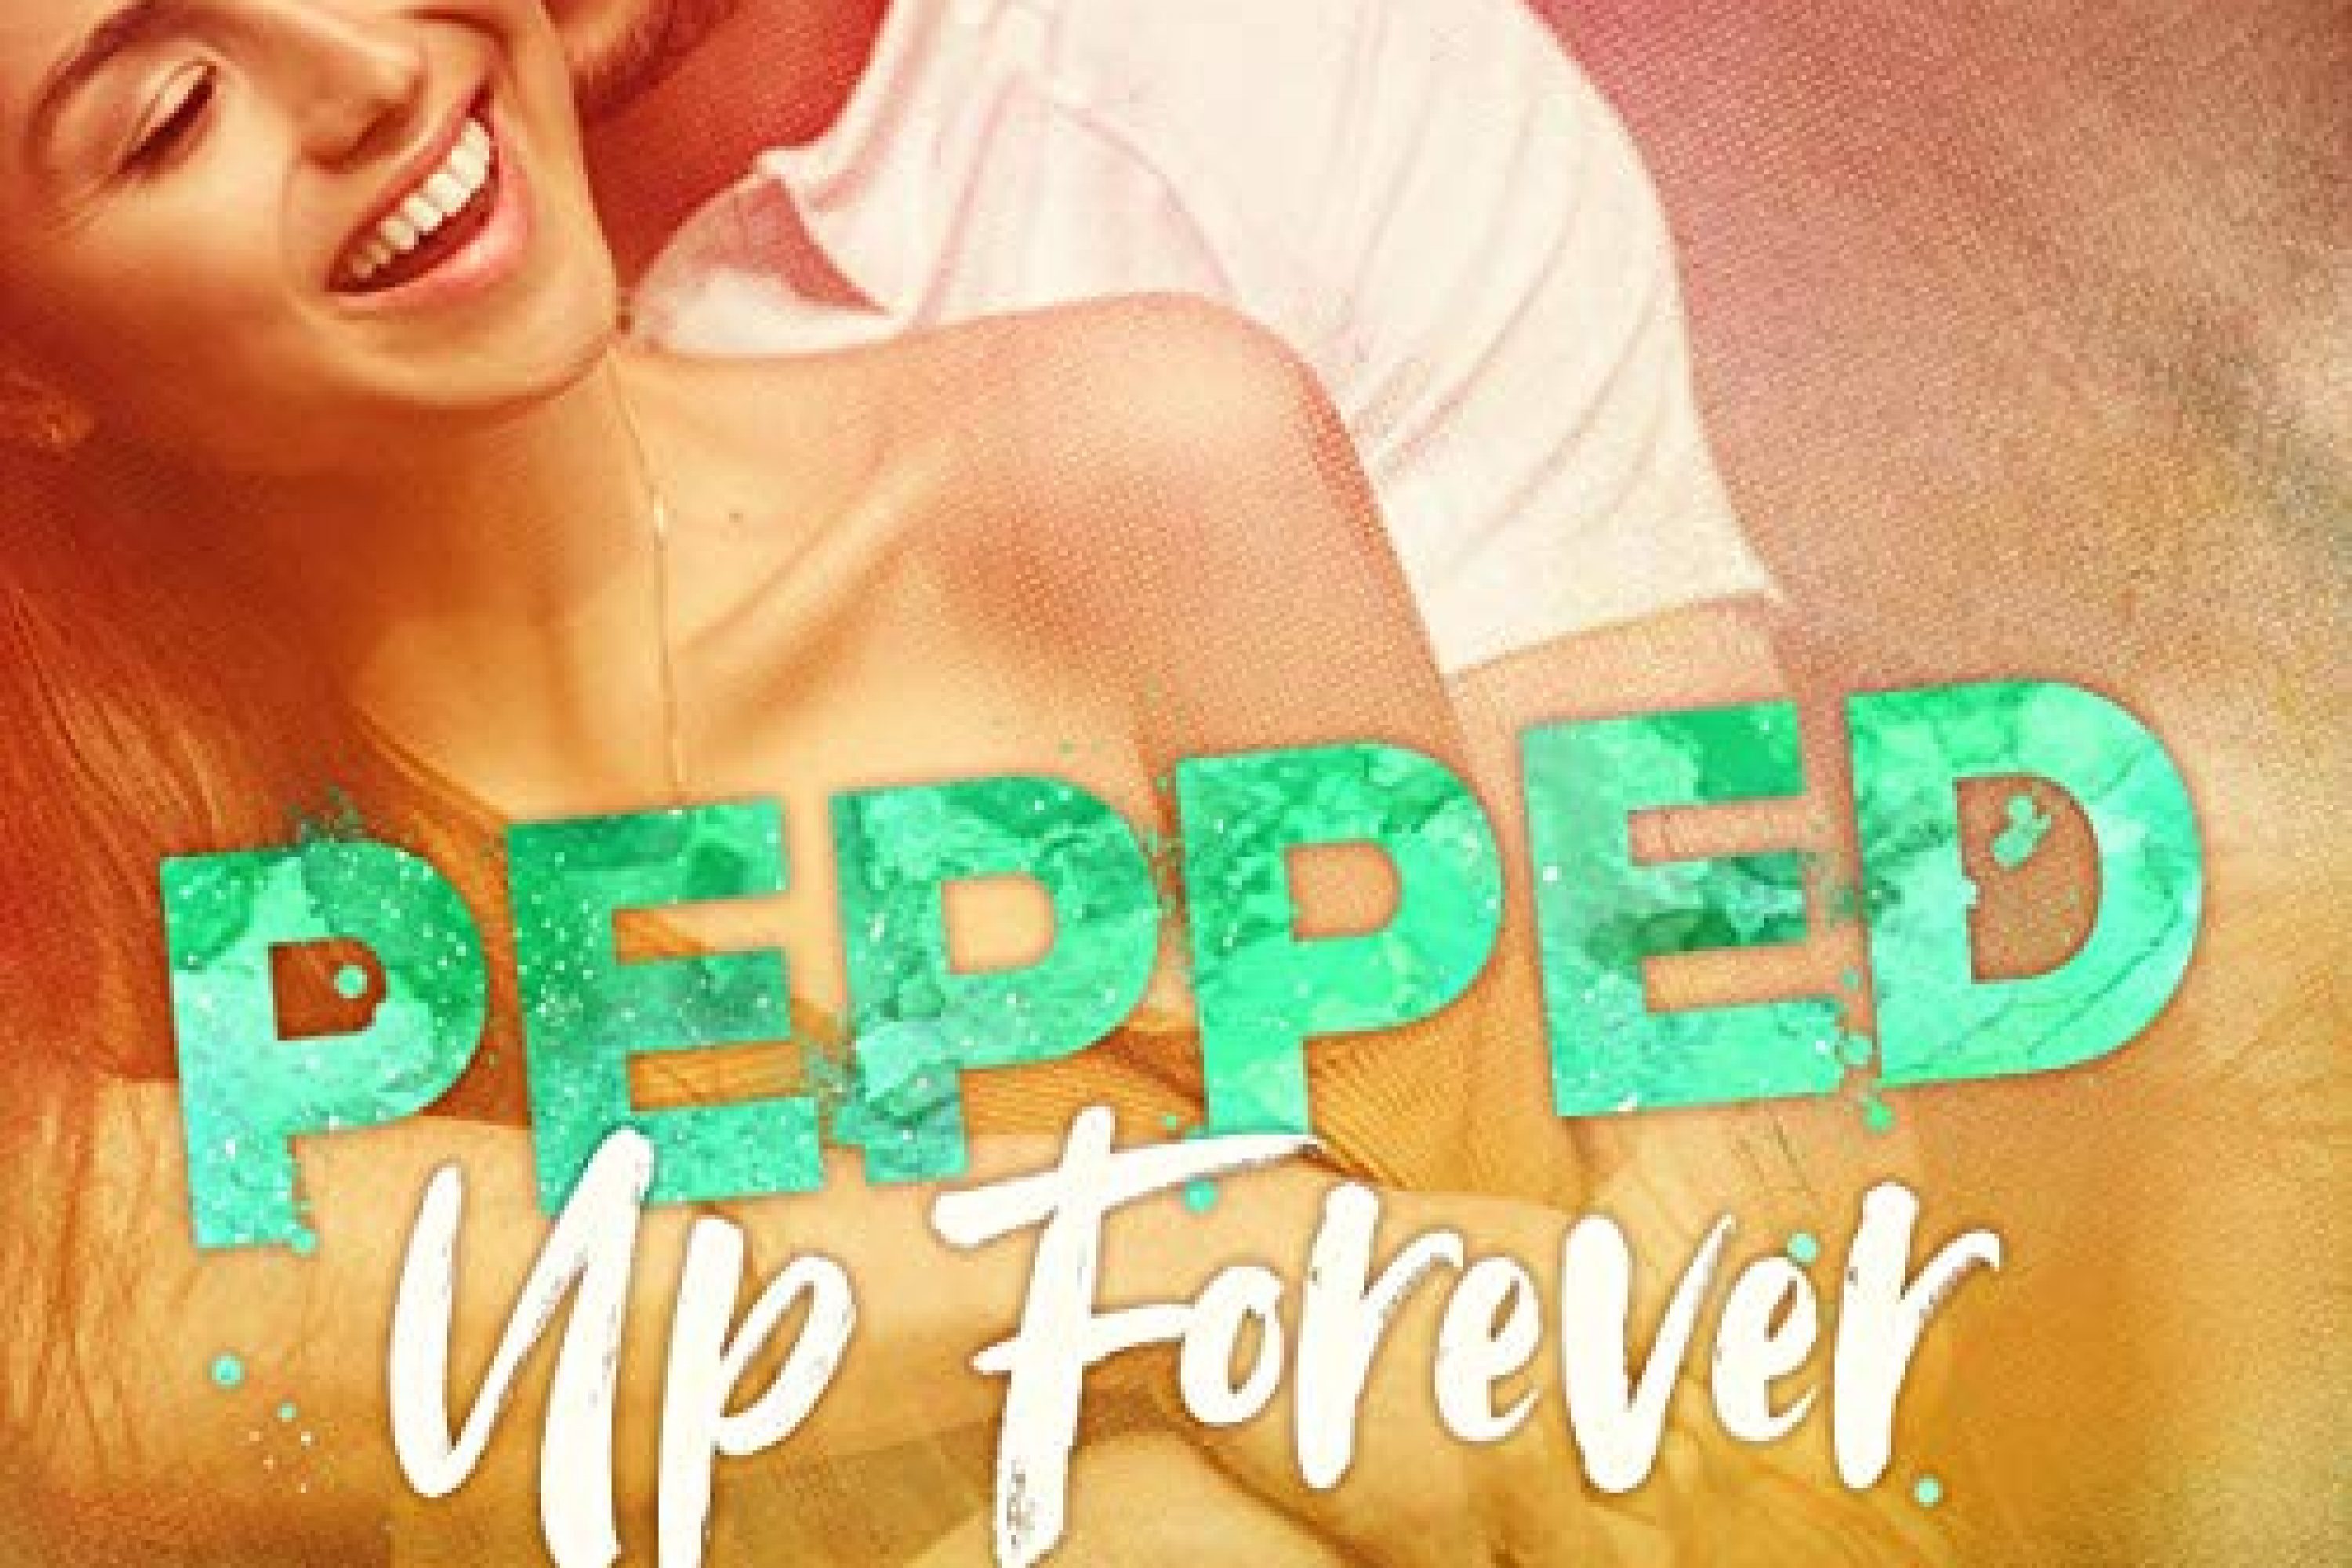 Audiobook Review: Pepped Up Forever by Ali Dean